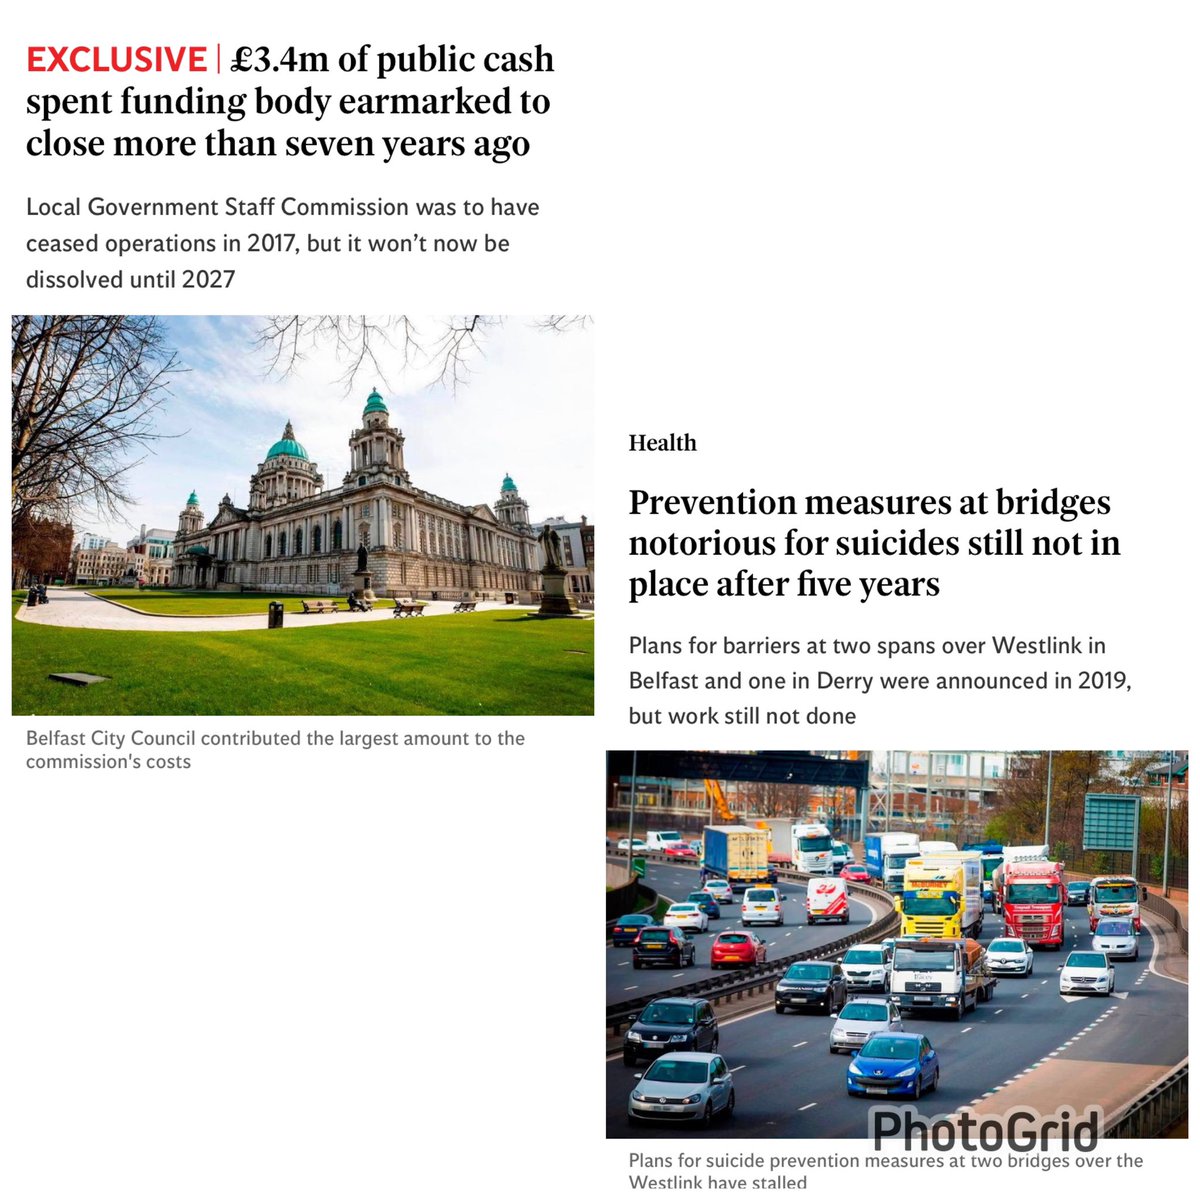 Can someone in @niexecutive join up the dots here? 2 stories this wk by @ismiseliam Suicide prevention measures at 3 bridges not carried out as there isn’t the £1.8 m work costs £3.4m of public cash spent on body earmarked for closure 7 yrs ago. So money isn’t the problem